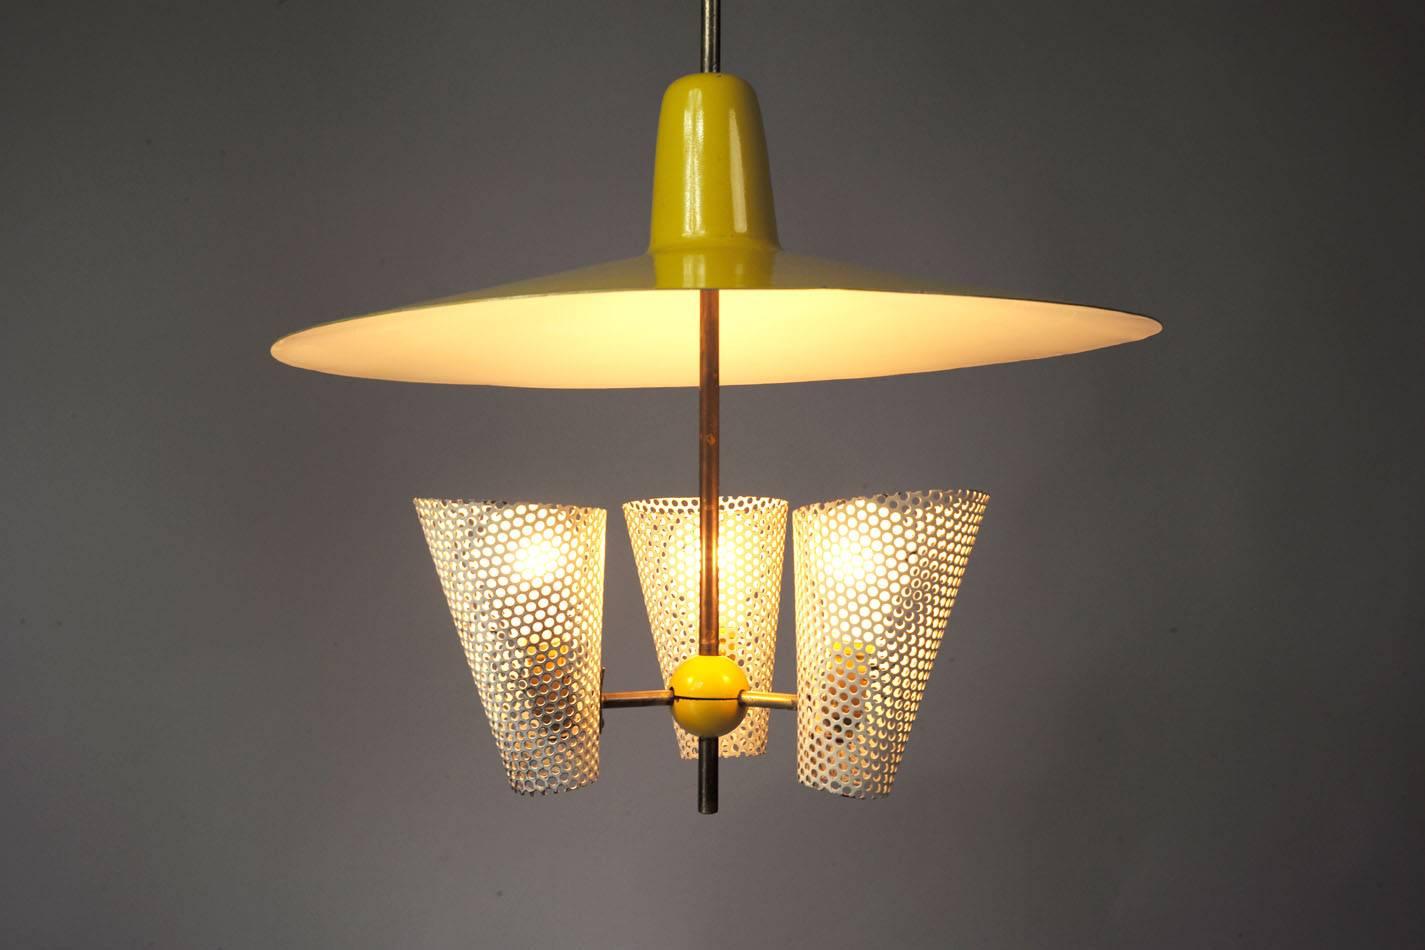 This vintage suspension lamp was made and manufactured during the 1950s by Stellar, assigned to Jacques Biny. It features three white painted perforated metal bulb shields covered by a bigger yellow and adjustable reflector. The lamp is in excellent